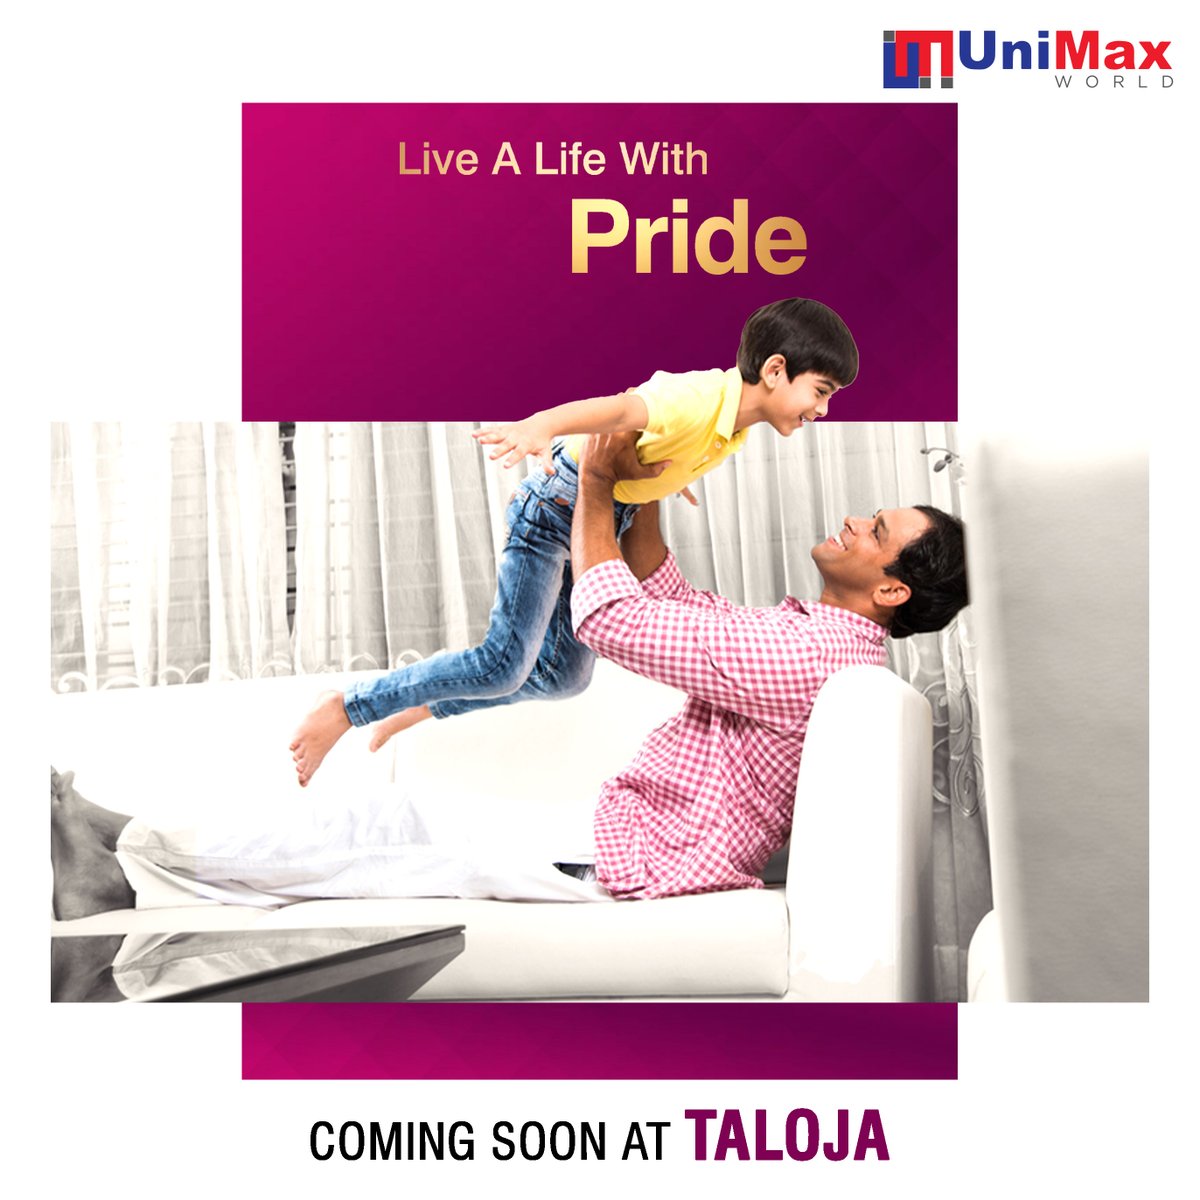 Make your home a pride-filled haven where every joyful moment becomes a treasured memory shared with your loved ones. #UnimaxWorld #HomeSweetHome #PrideAndJoy #TreasureMoments #FamilyTime #CherishedMemories #Togetherness #HomeIsWhereTheHeartIs